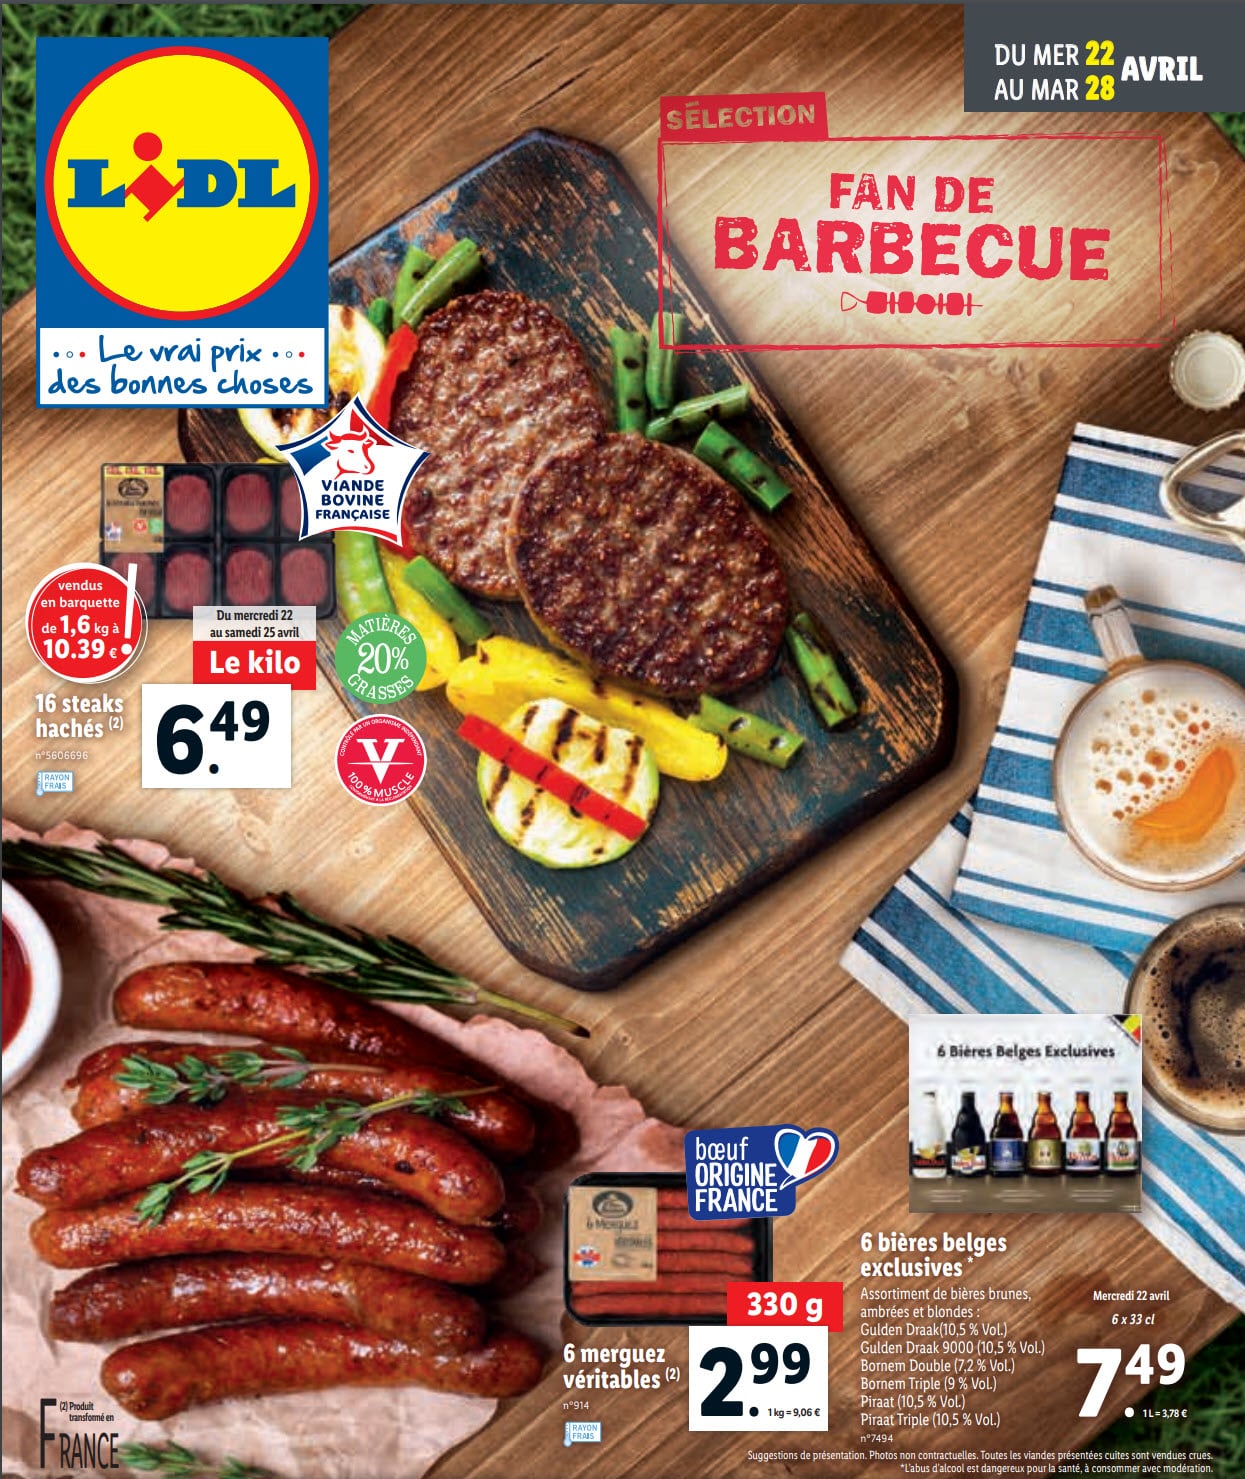 Lidl catalogue 22 avril